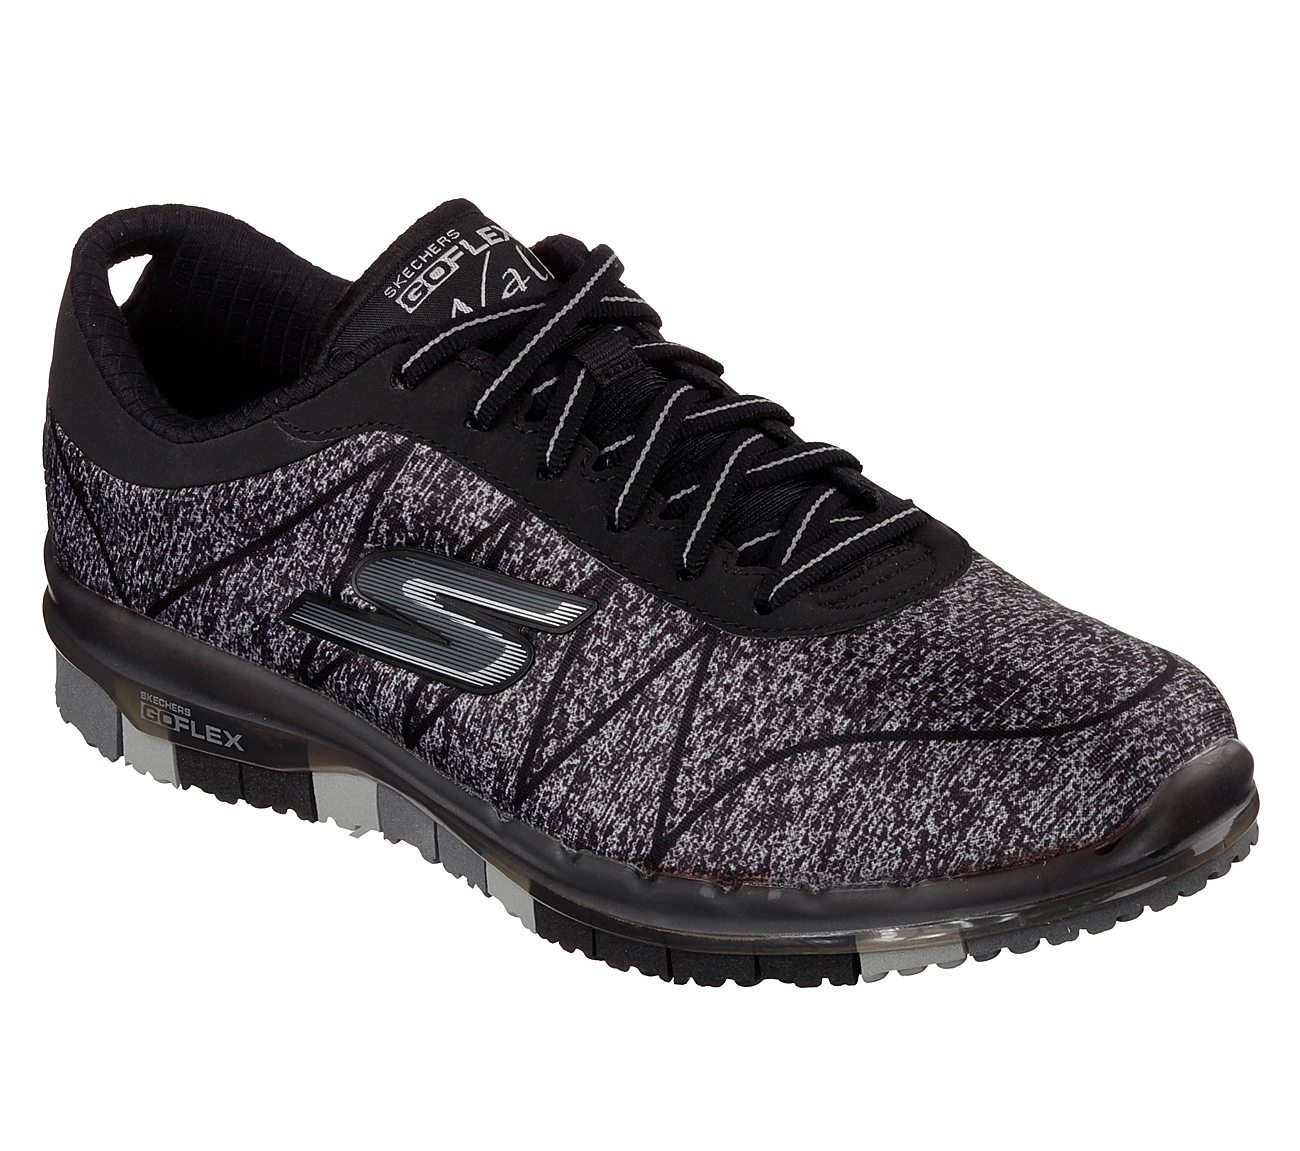 Skechers walking shoes – Best walking shoes for all types of activities